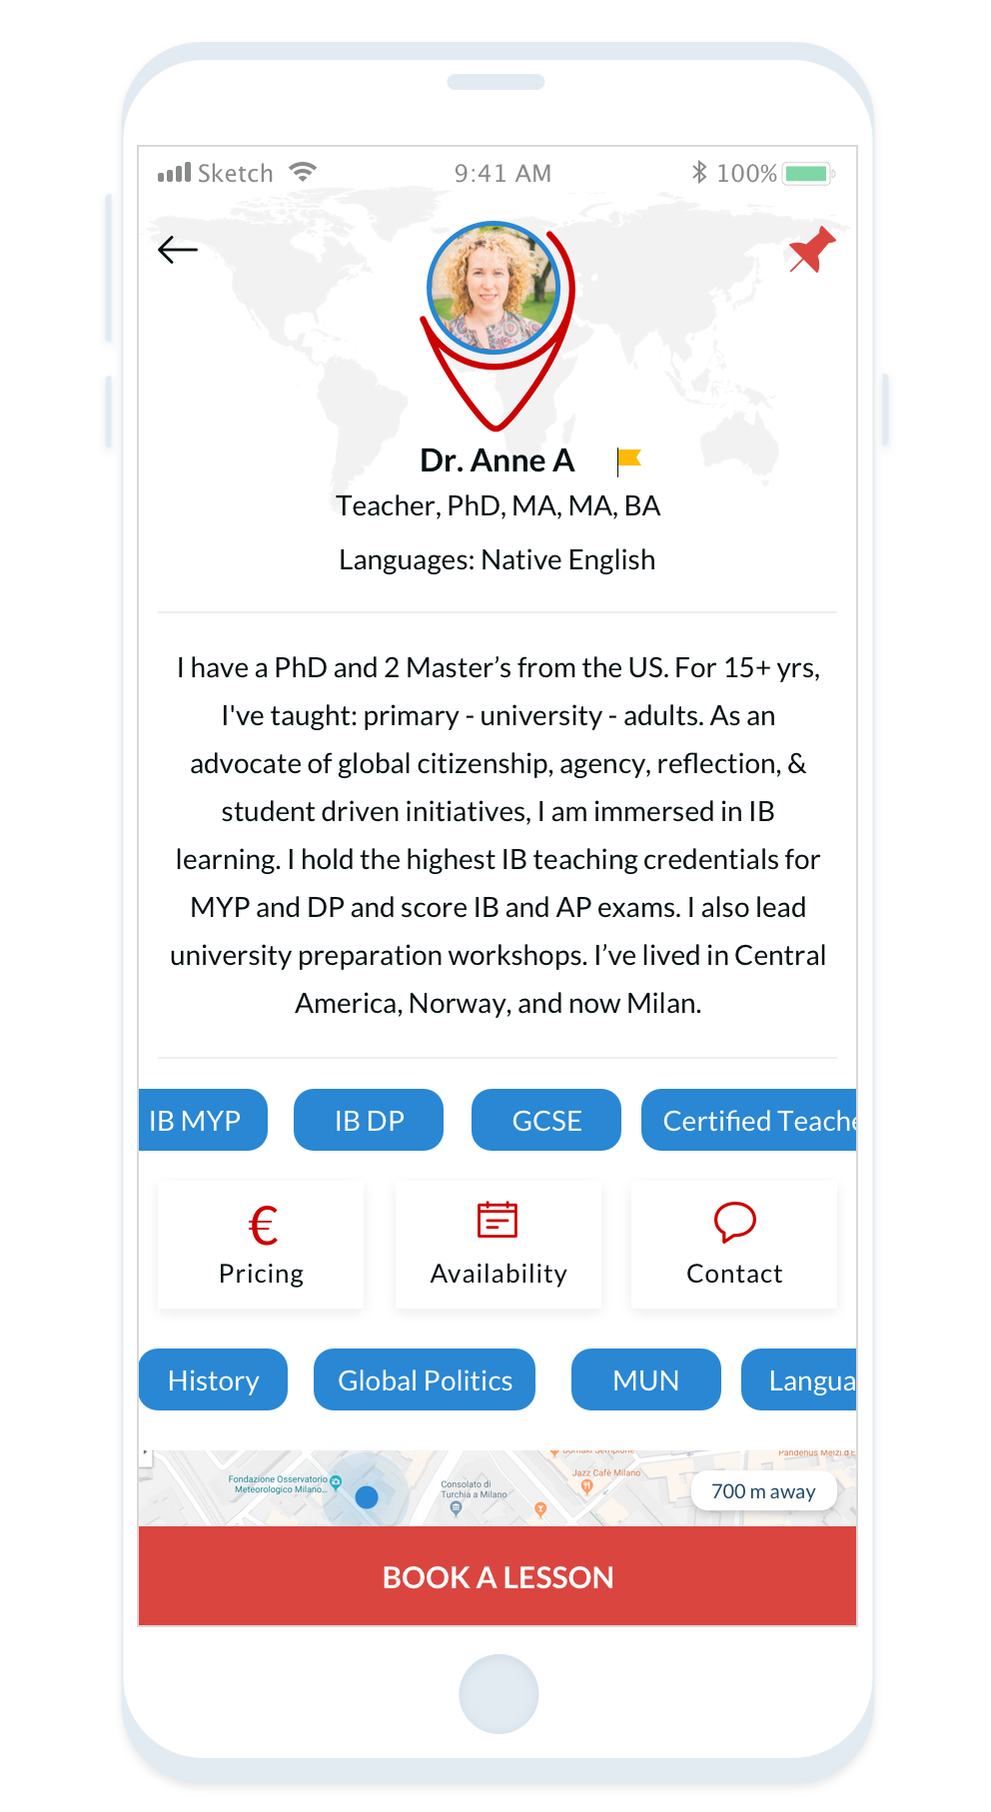 Find an academic coach and Tutor who can help you set and reach your academic goals. It’s easy with Tutor Around App! 